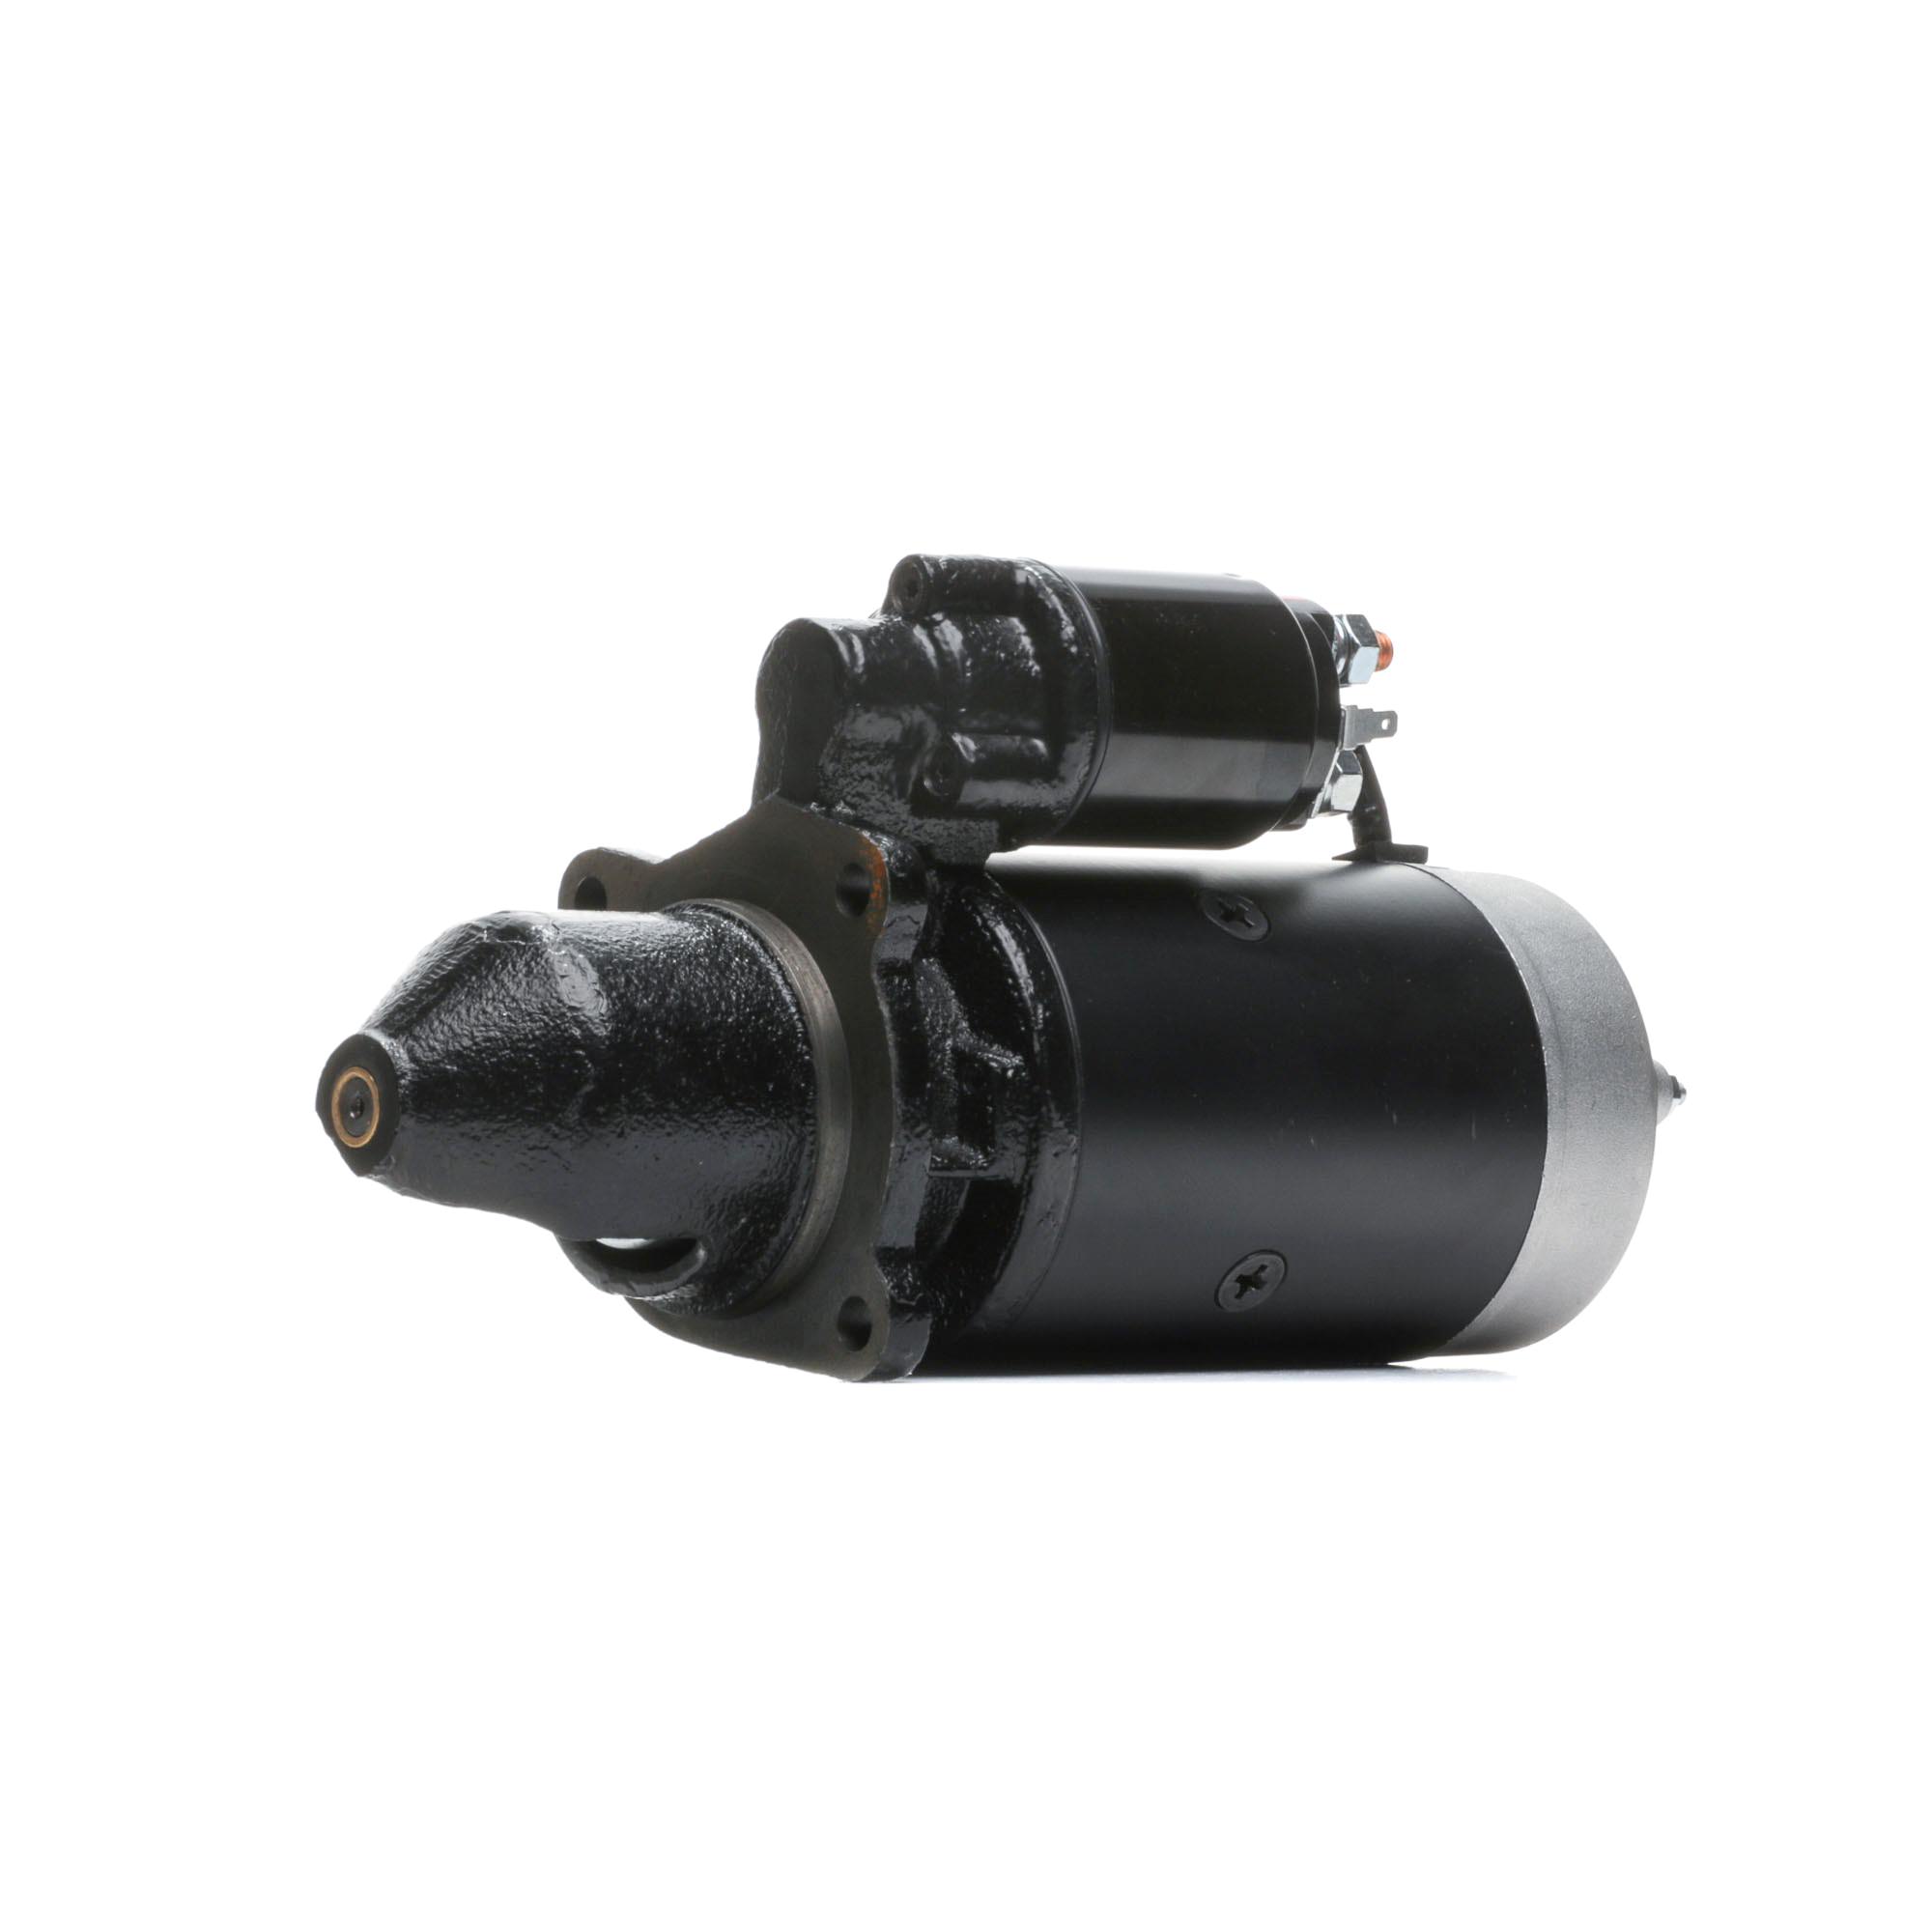 RIDEX 2S0186 Starter motor 24V, 4kW, Number of Teeth: 9, with 50(Jet) clamp, Ø 89 mm